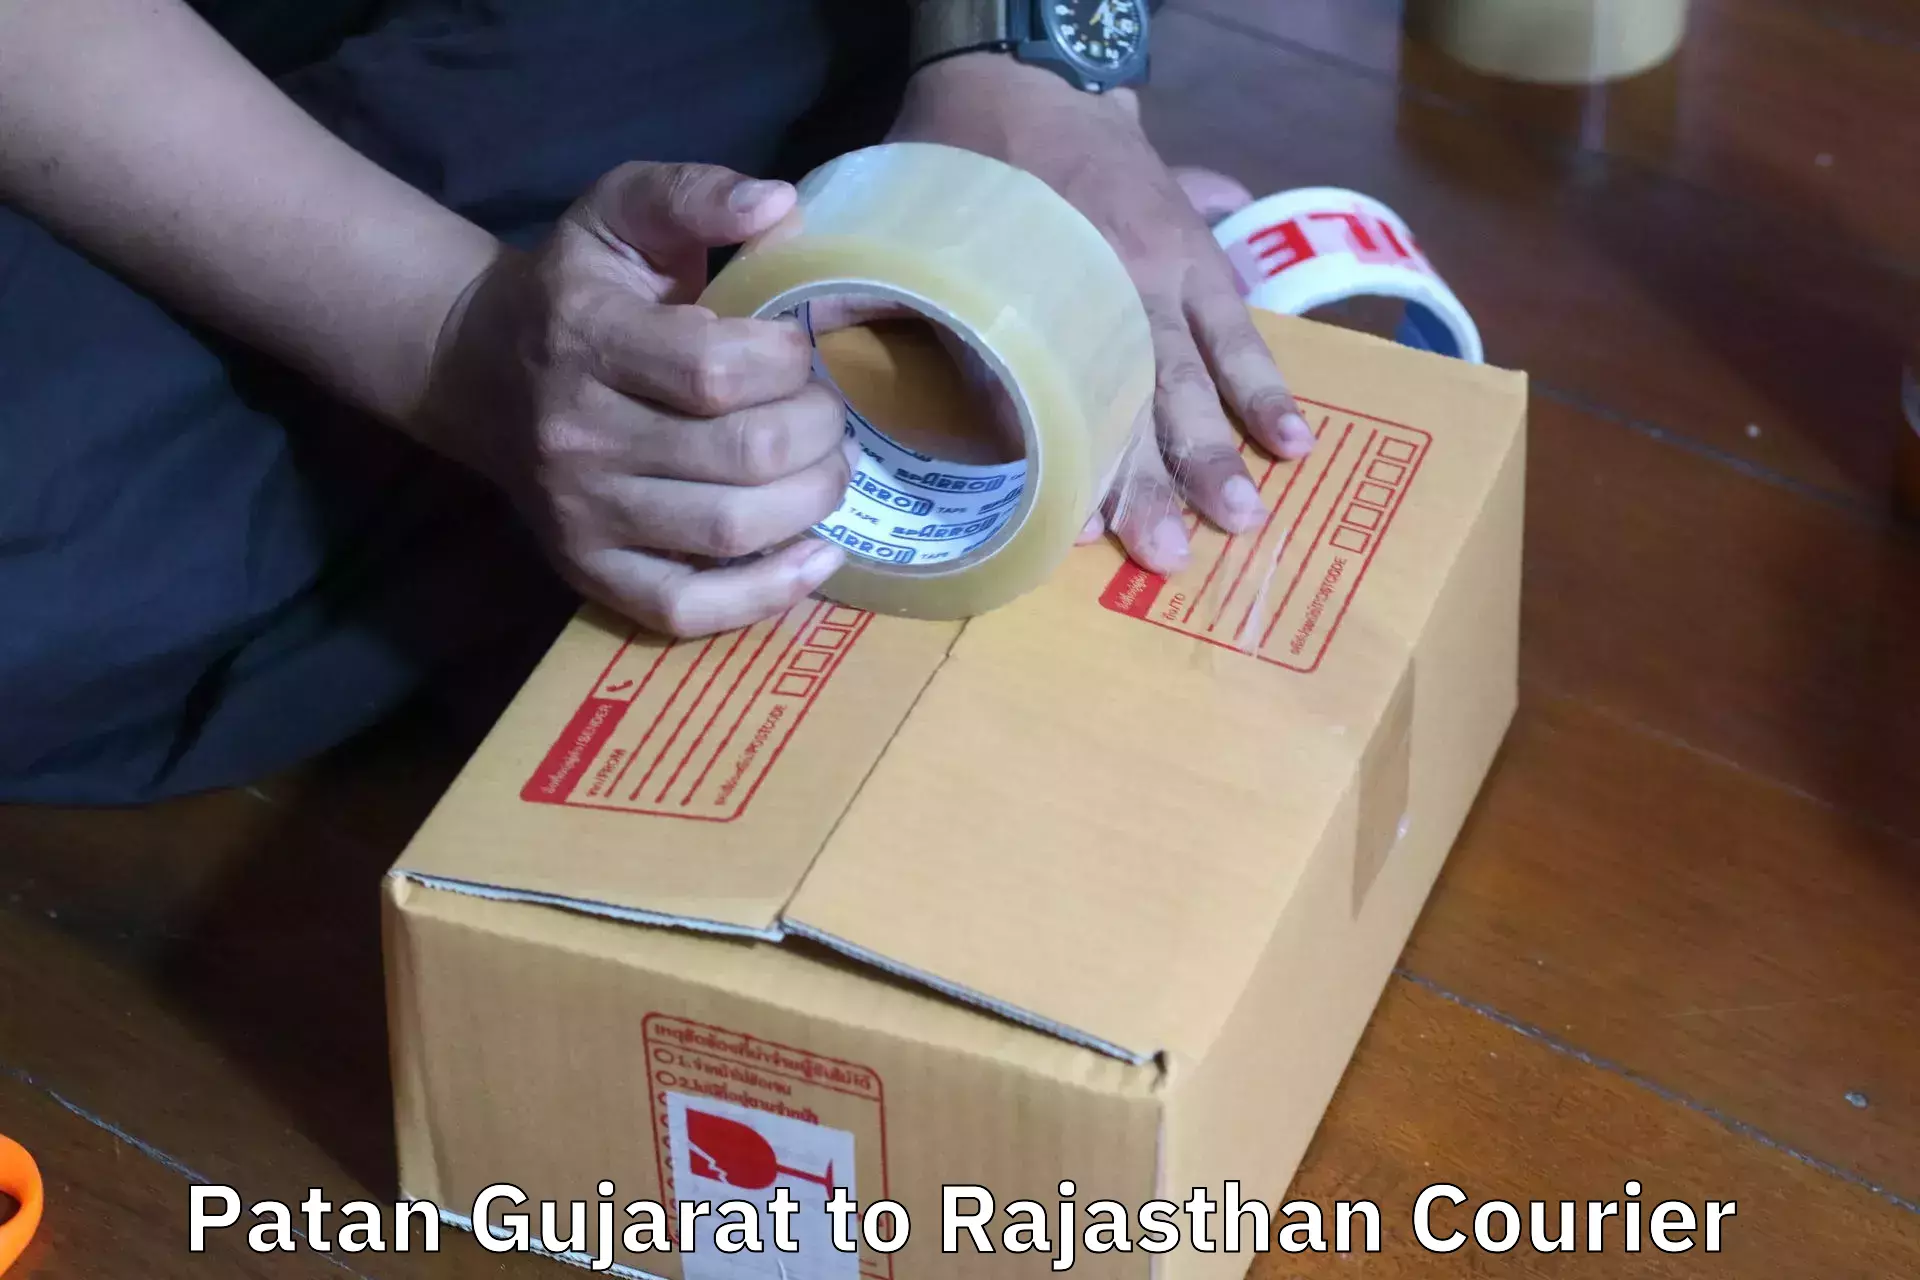 Trusted relocation experts Patan Gujarat to Sultana